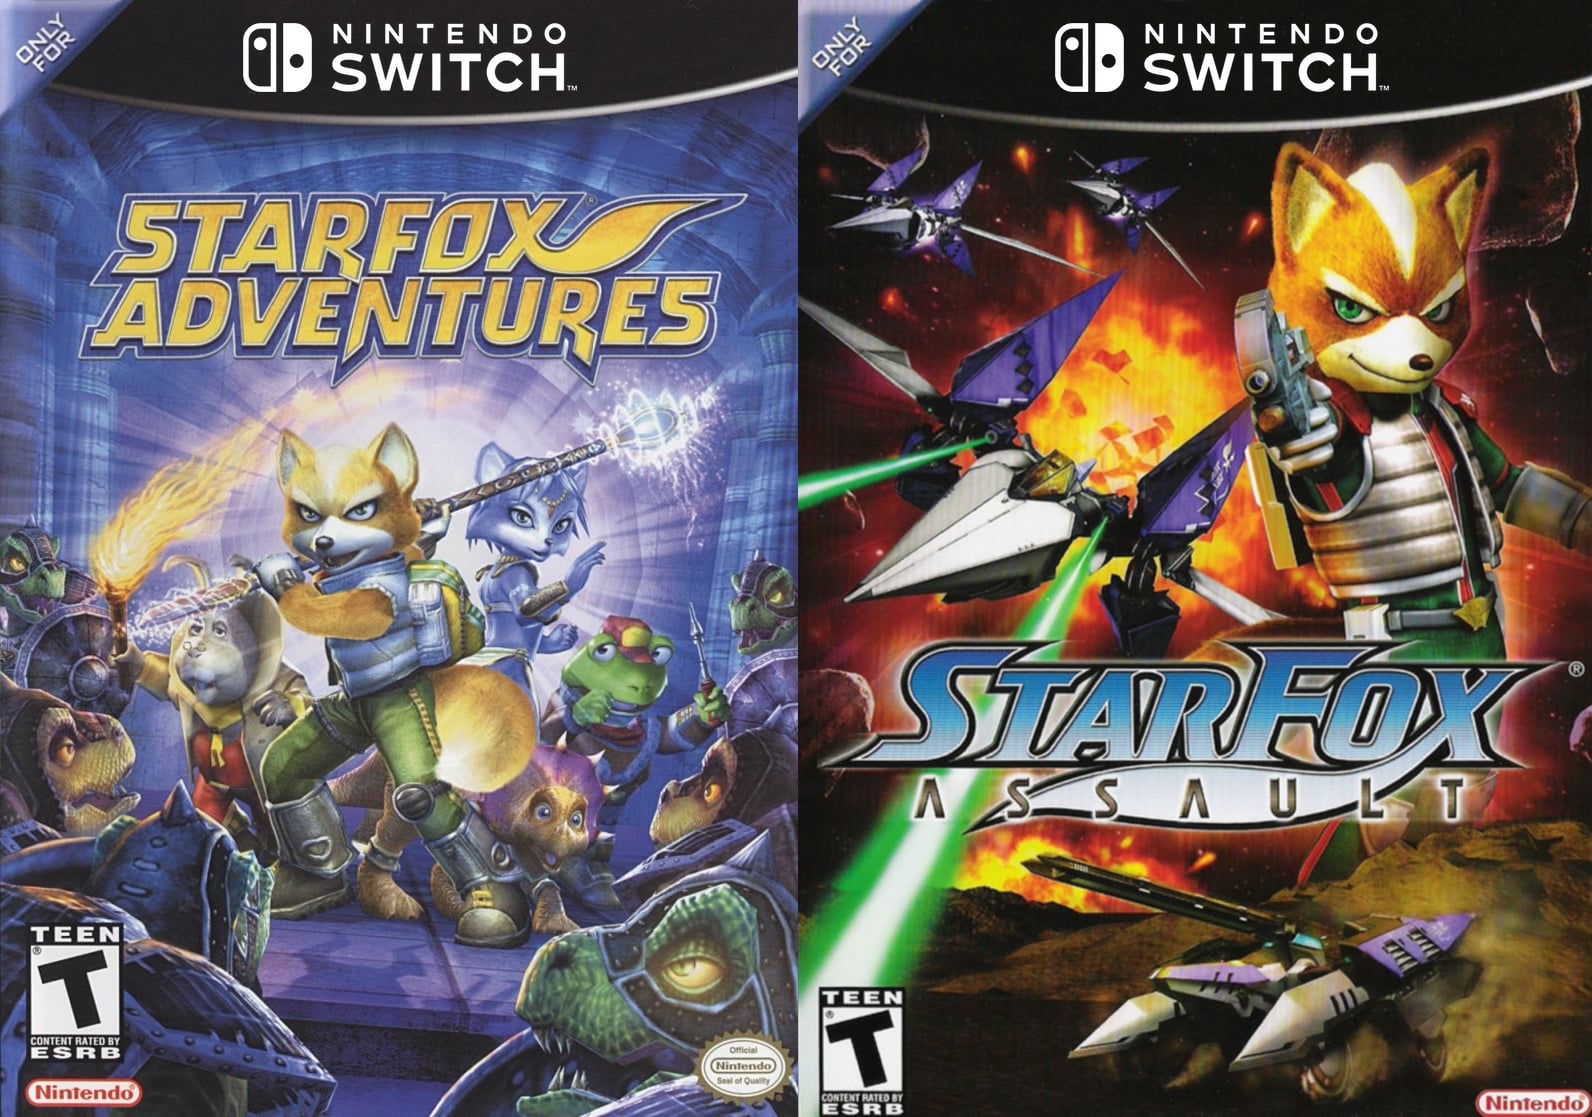 will gamecube games come to switch